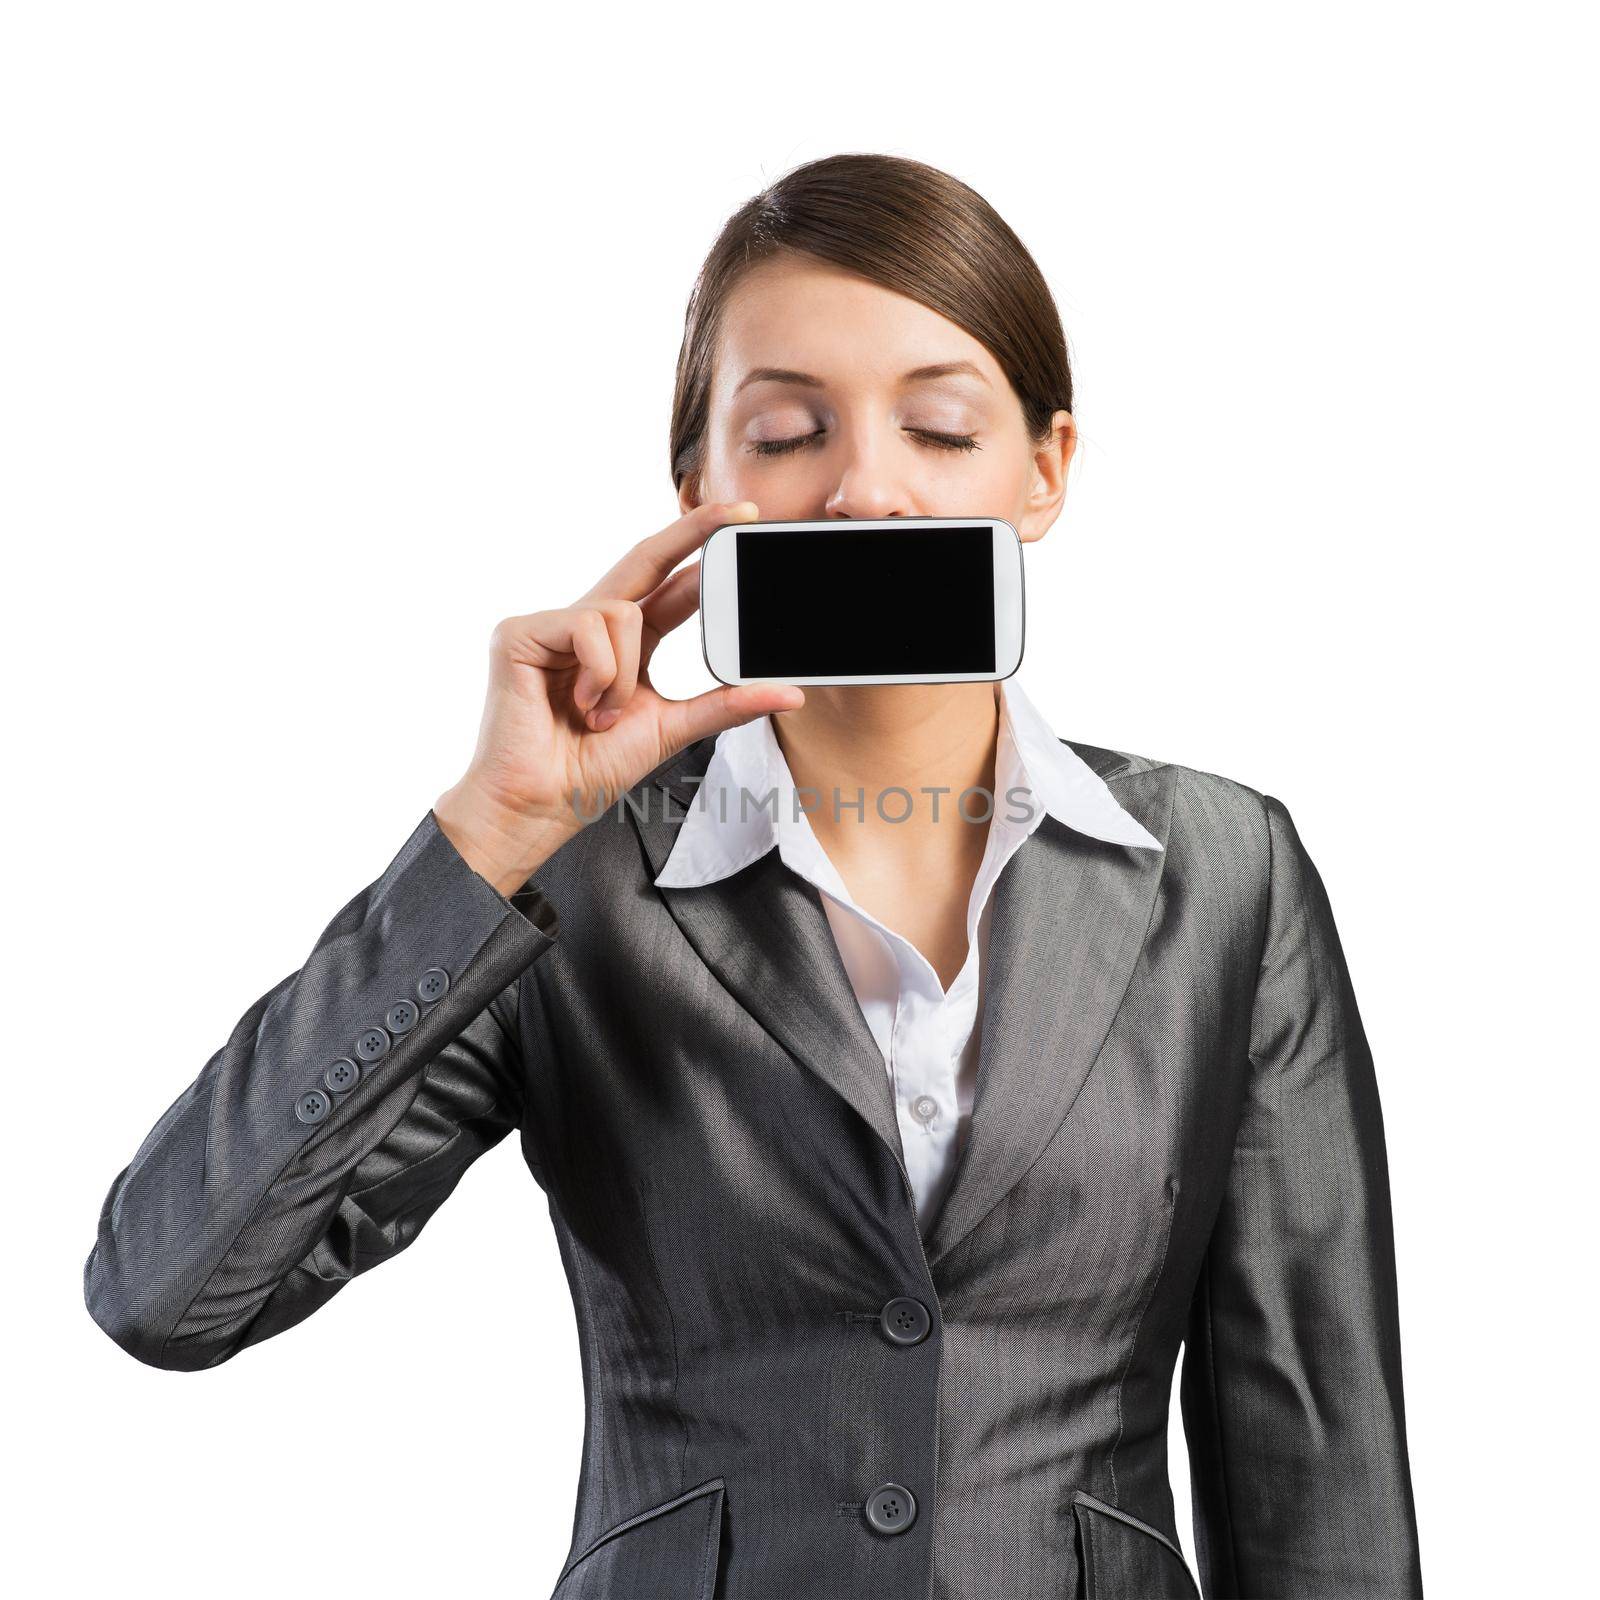 Pretty woman with closed eyes showing mobile phone near her face. Businesswoman holding smartphone with blank screen. Corporate businessperson isolated on white background. Mobile communication